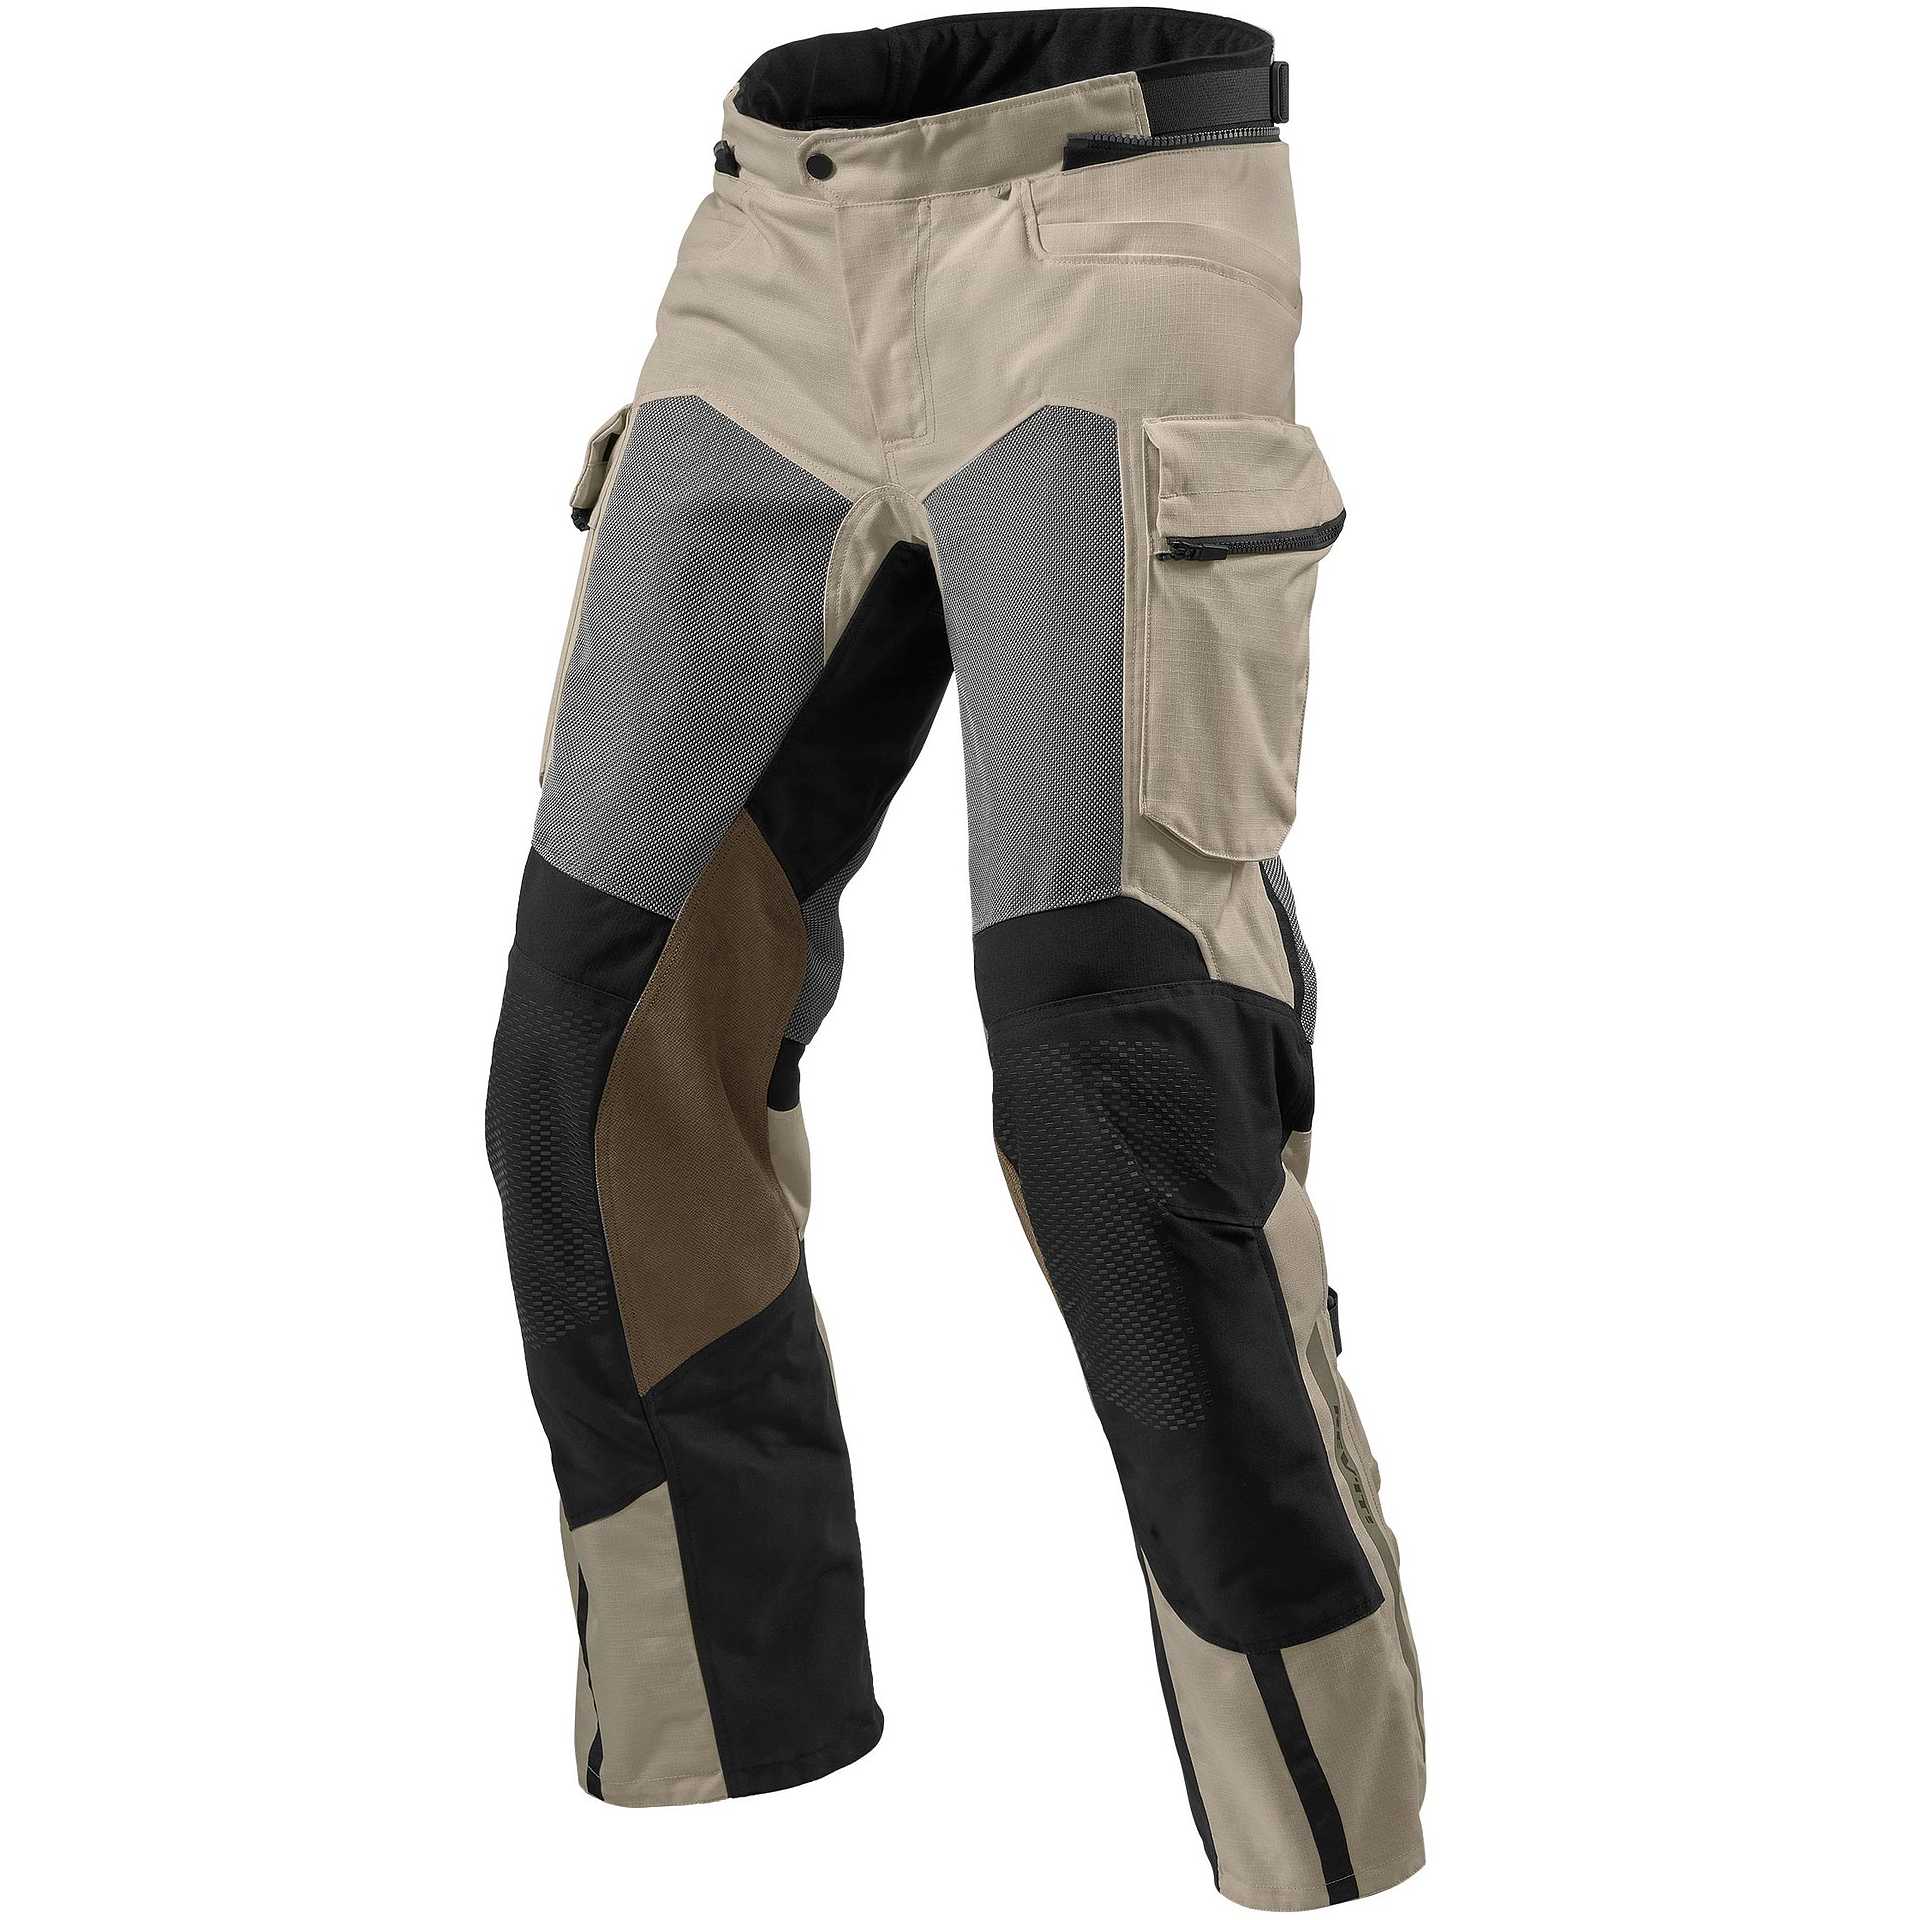 The Best Women's Motorcycle Pants for 2023